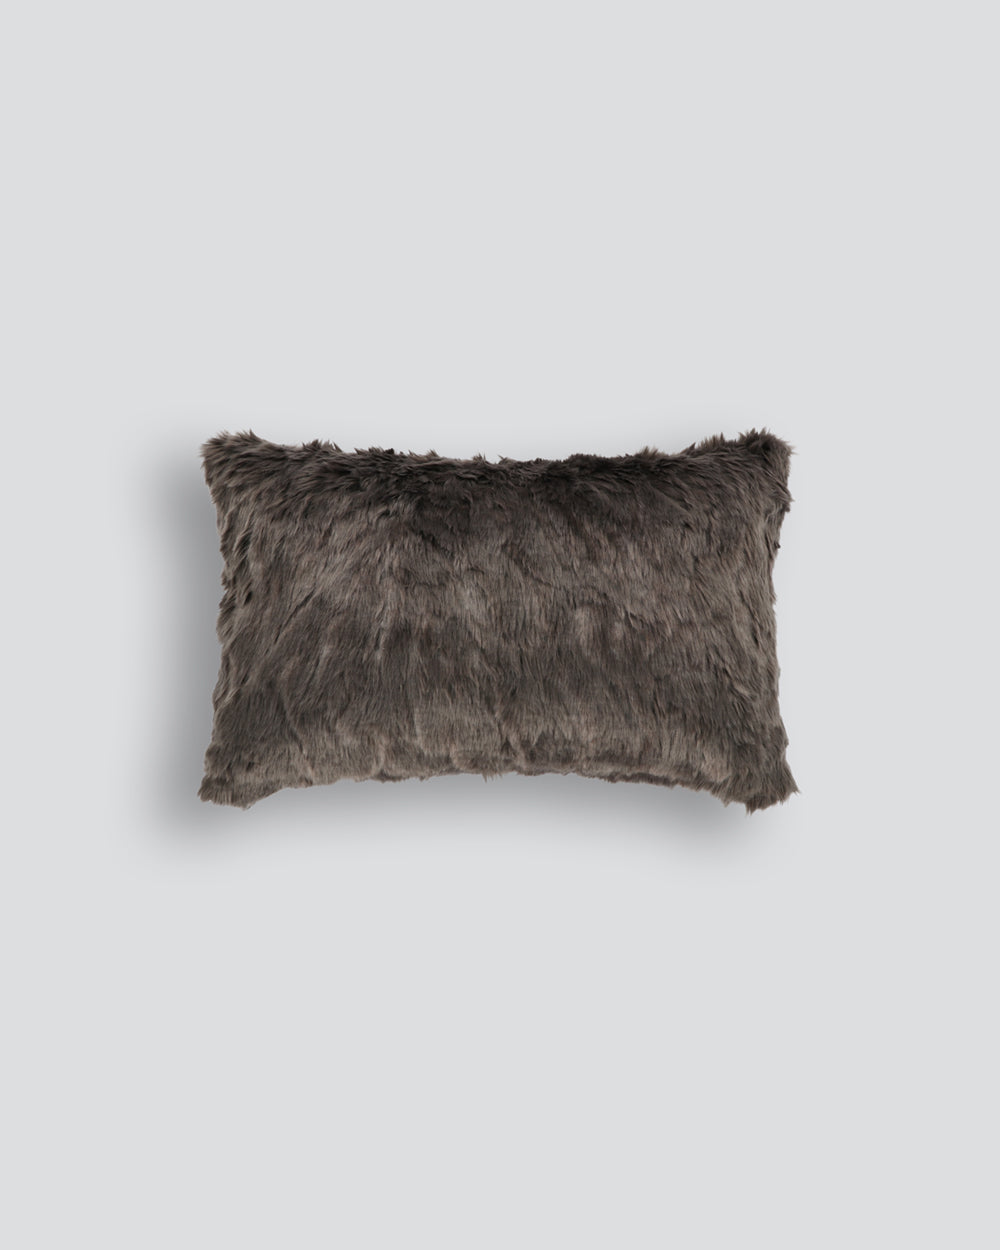 Heirloom Pewter Chinchilla Cushions in Faux Fur are available from Make Your House A Home Premium Stockist. Furniture Store Bendigo, Victoria. Australia Wide Delivery. Furtex Baya.